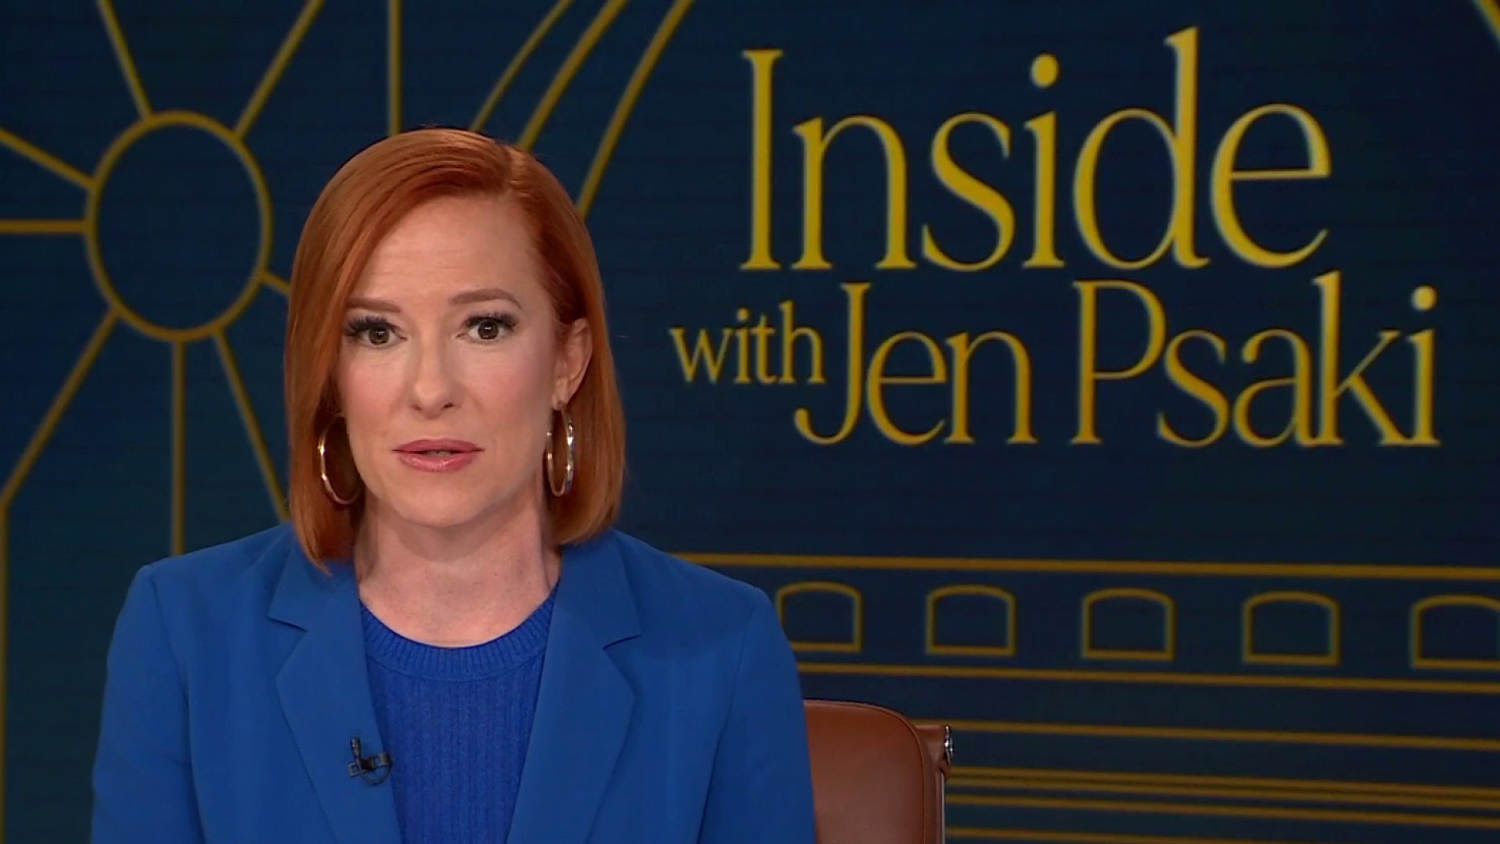 Jen Psaki: ‘Finding common ground through listening is often a tactic that isn't used as much as it should’